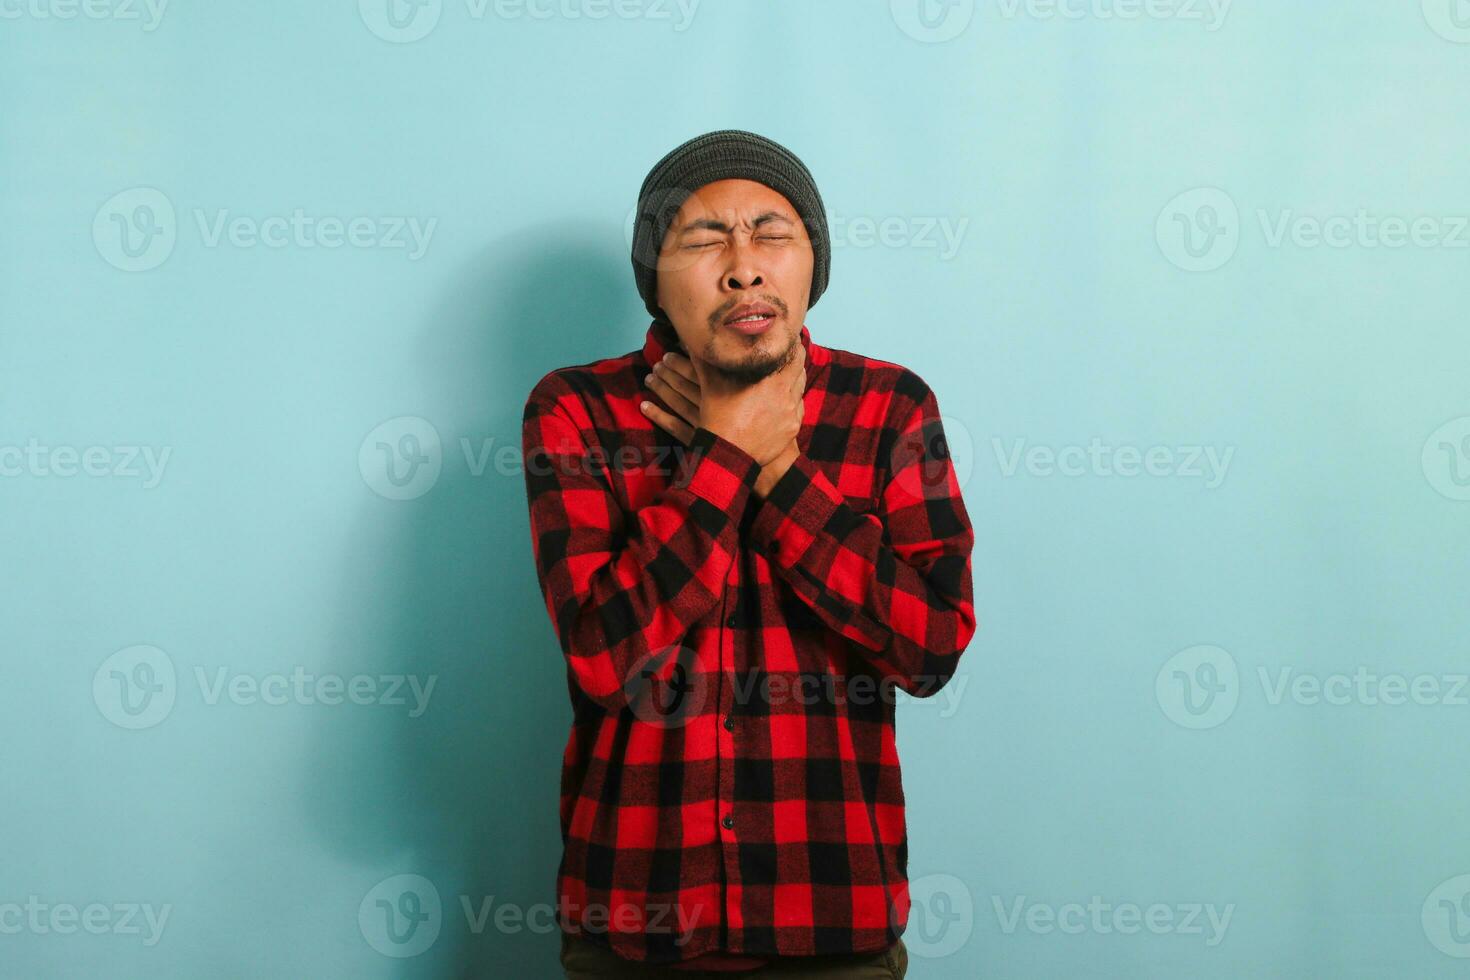 Unwell Young Asian man with beanie hat and red plaid flannel shirt holding his neck, suffering from a sore throat, cold, or flu, isolated on a blue background photo